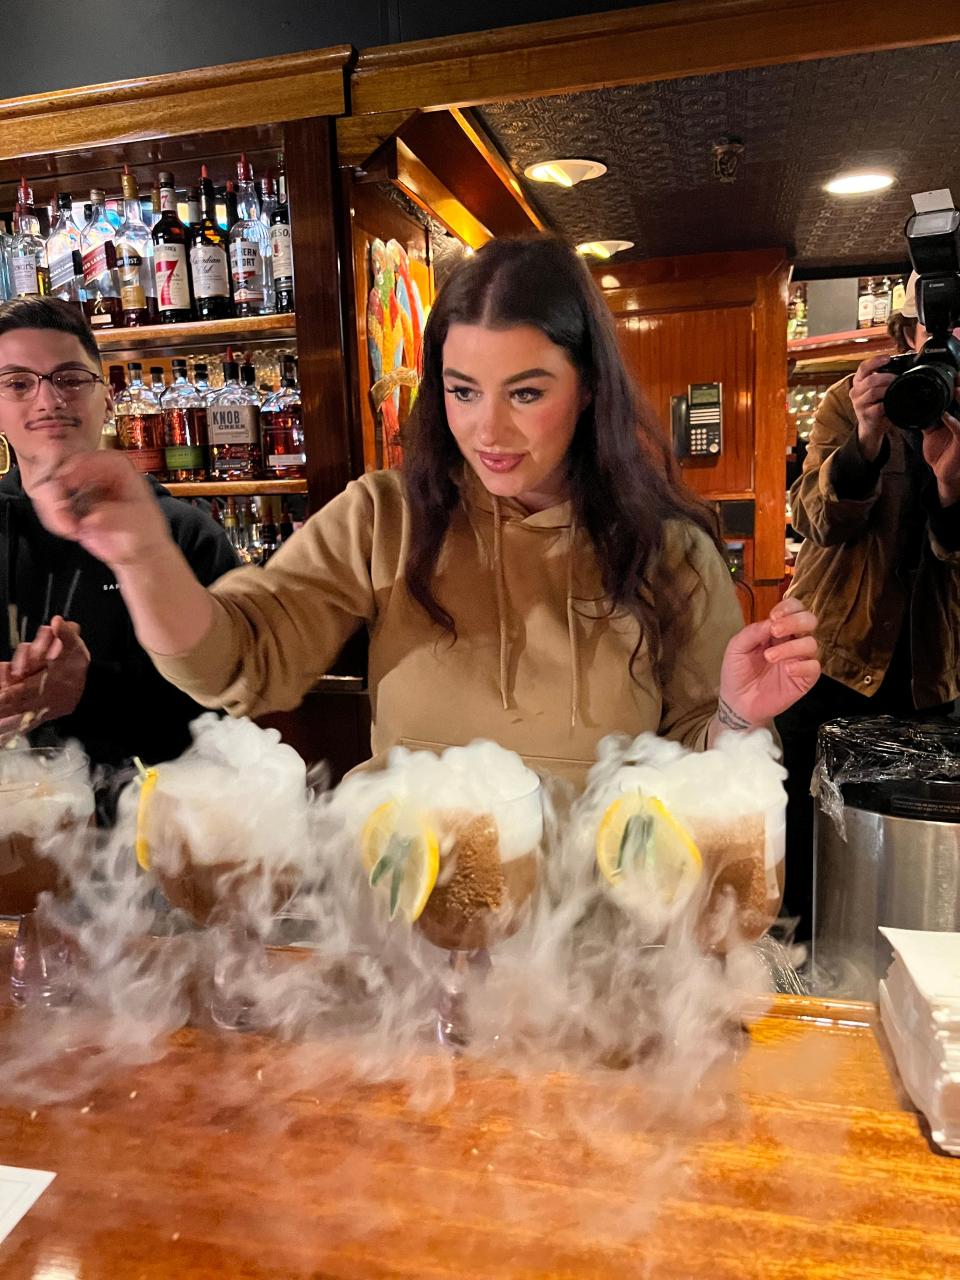 The hot drink contest heats up at the Red Parrot as part of the Newport Winter Festival.